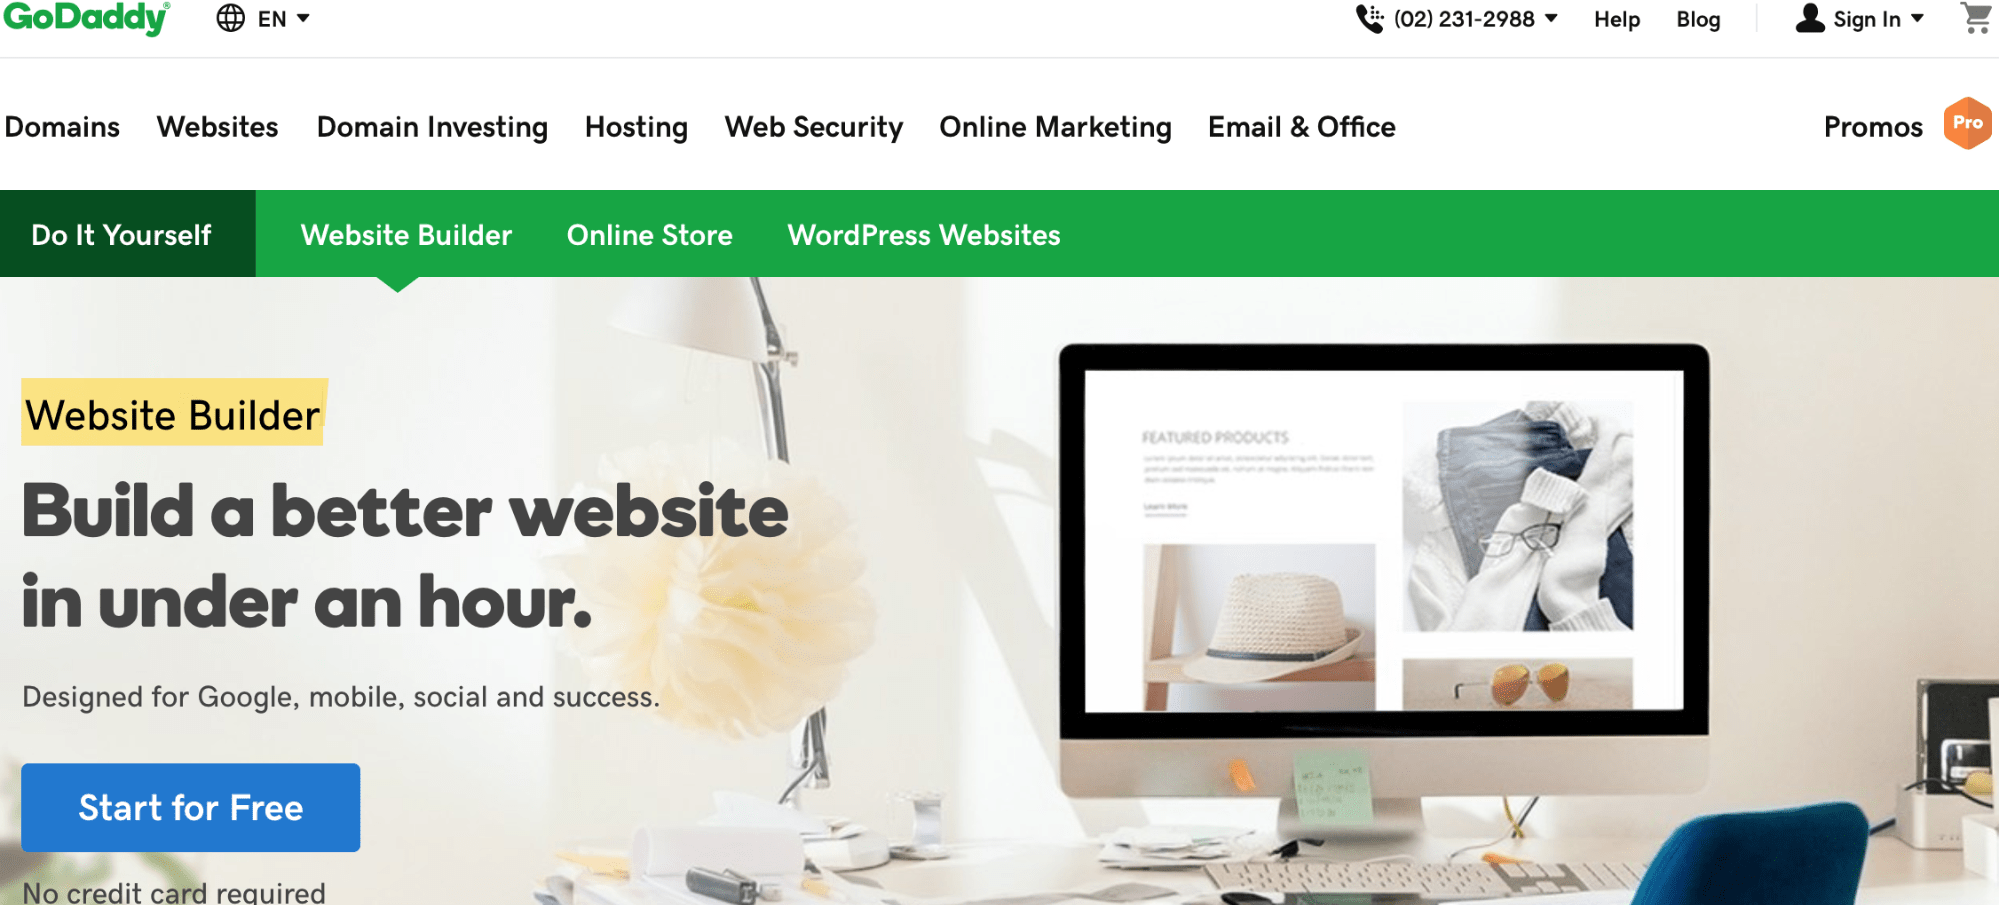 5 Things To Know About The Godaddy Website Builder